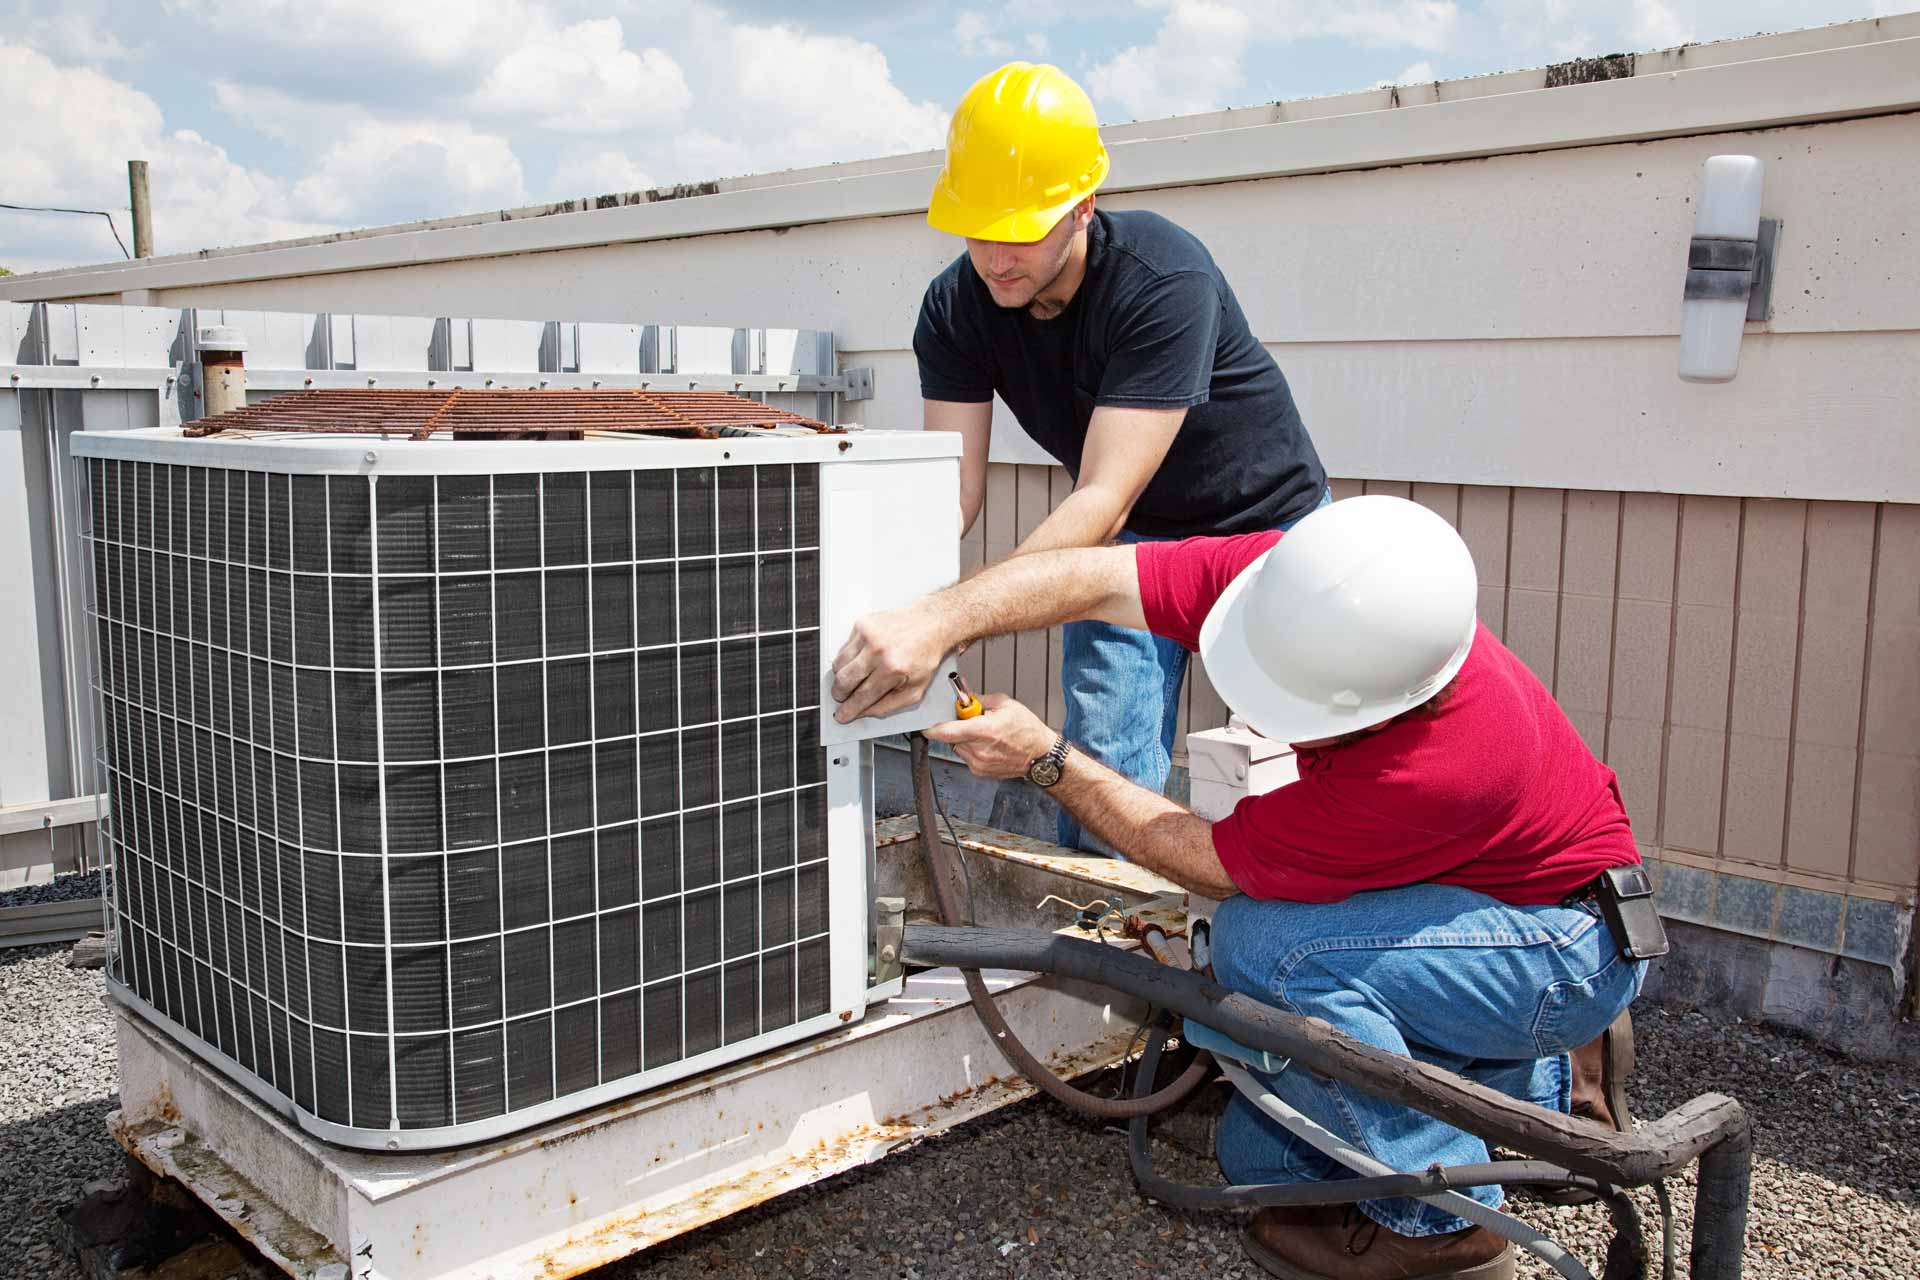 Two workers on the roof of a building working on the air conditioning unit